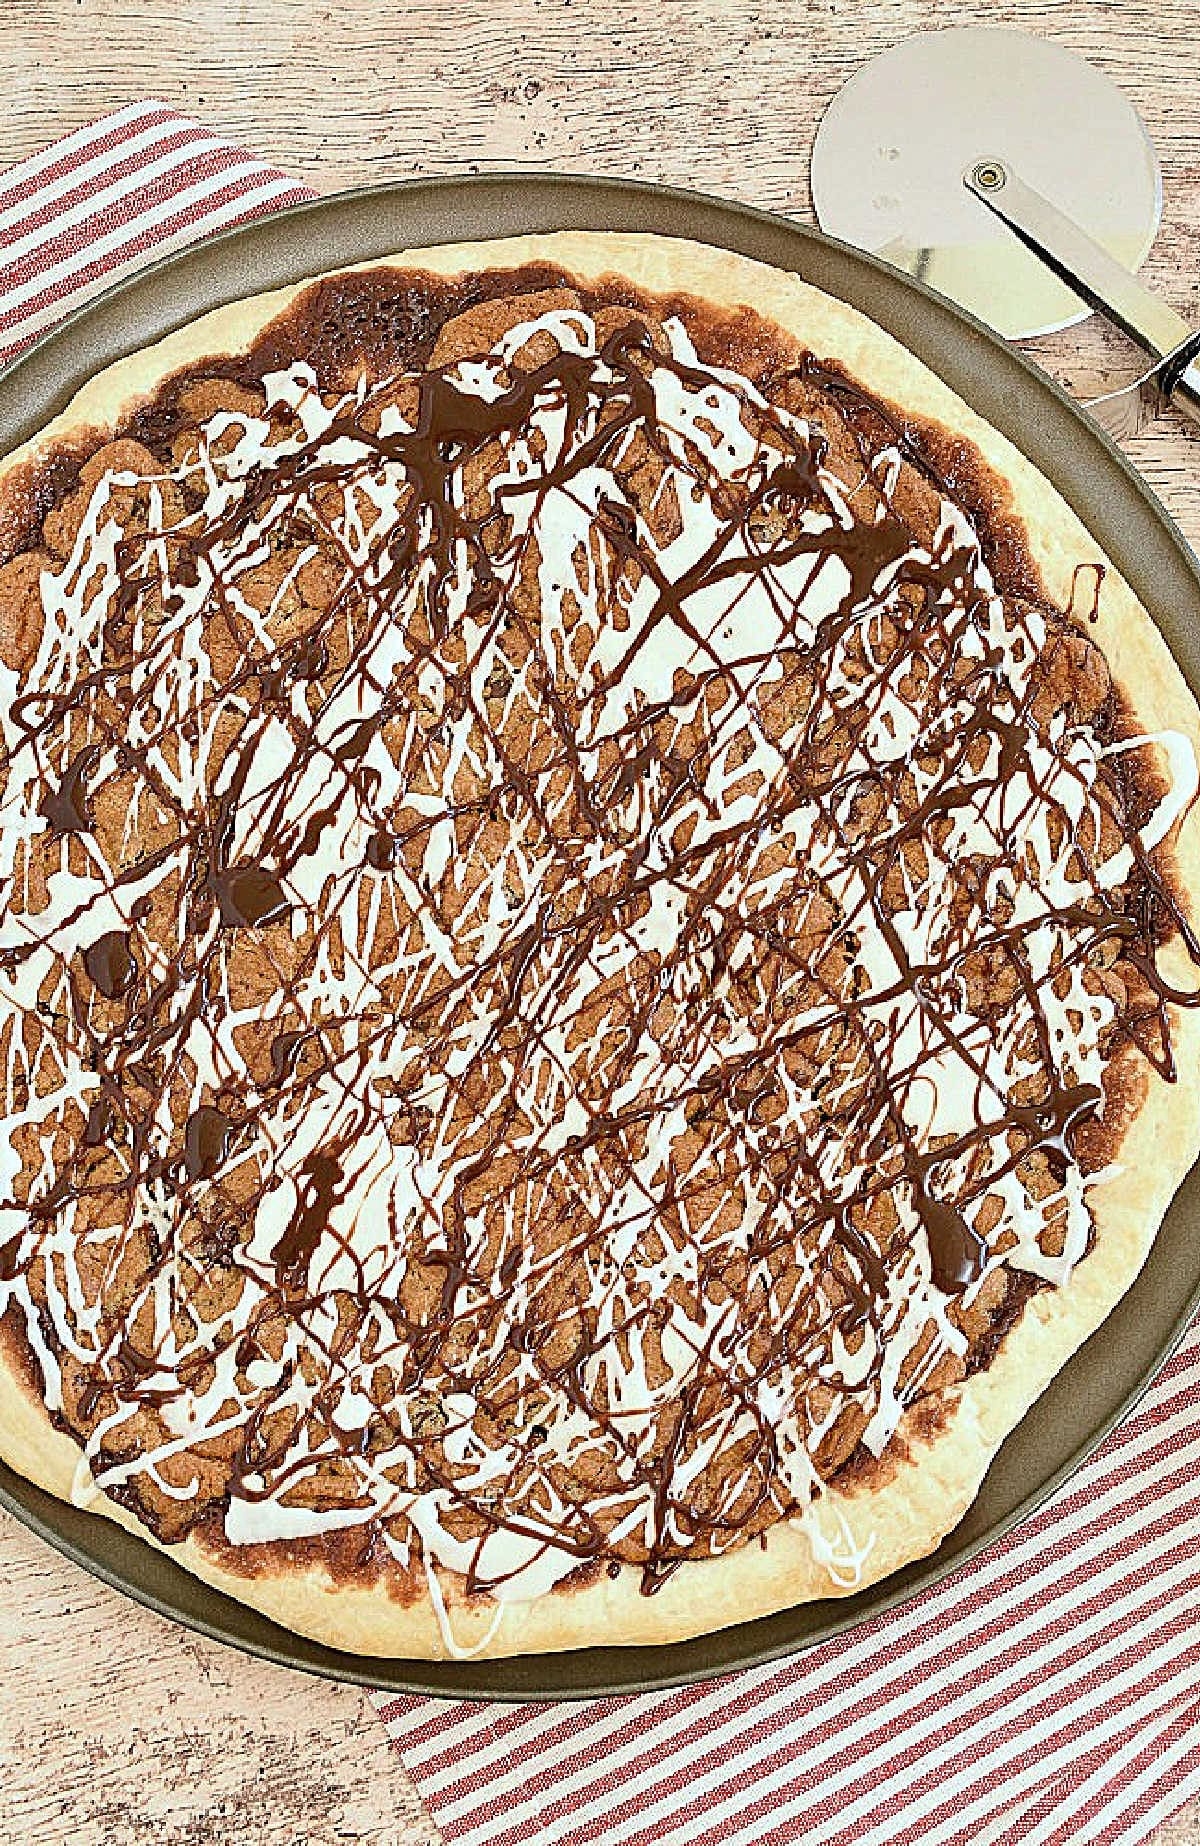 A dessert pizza with baked cookies and vanilla icing drizzled over the top.